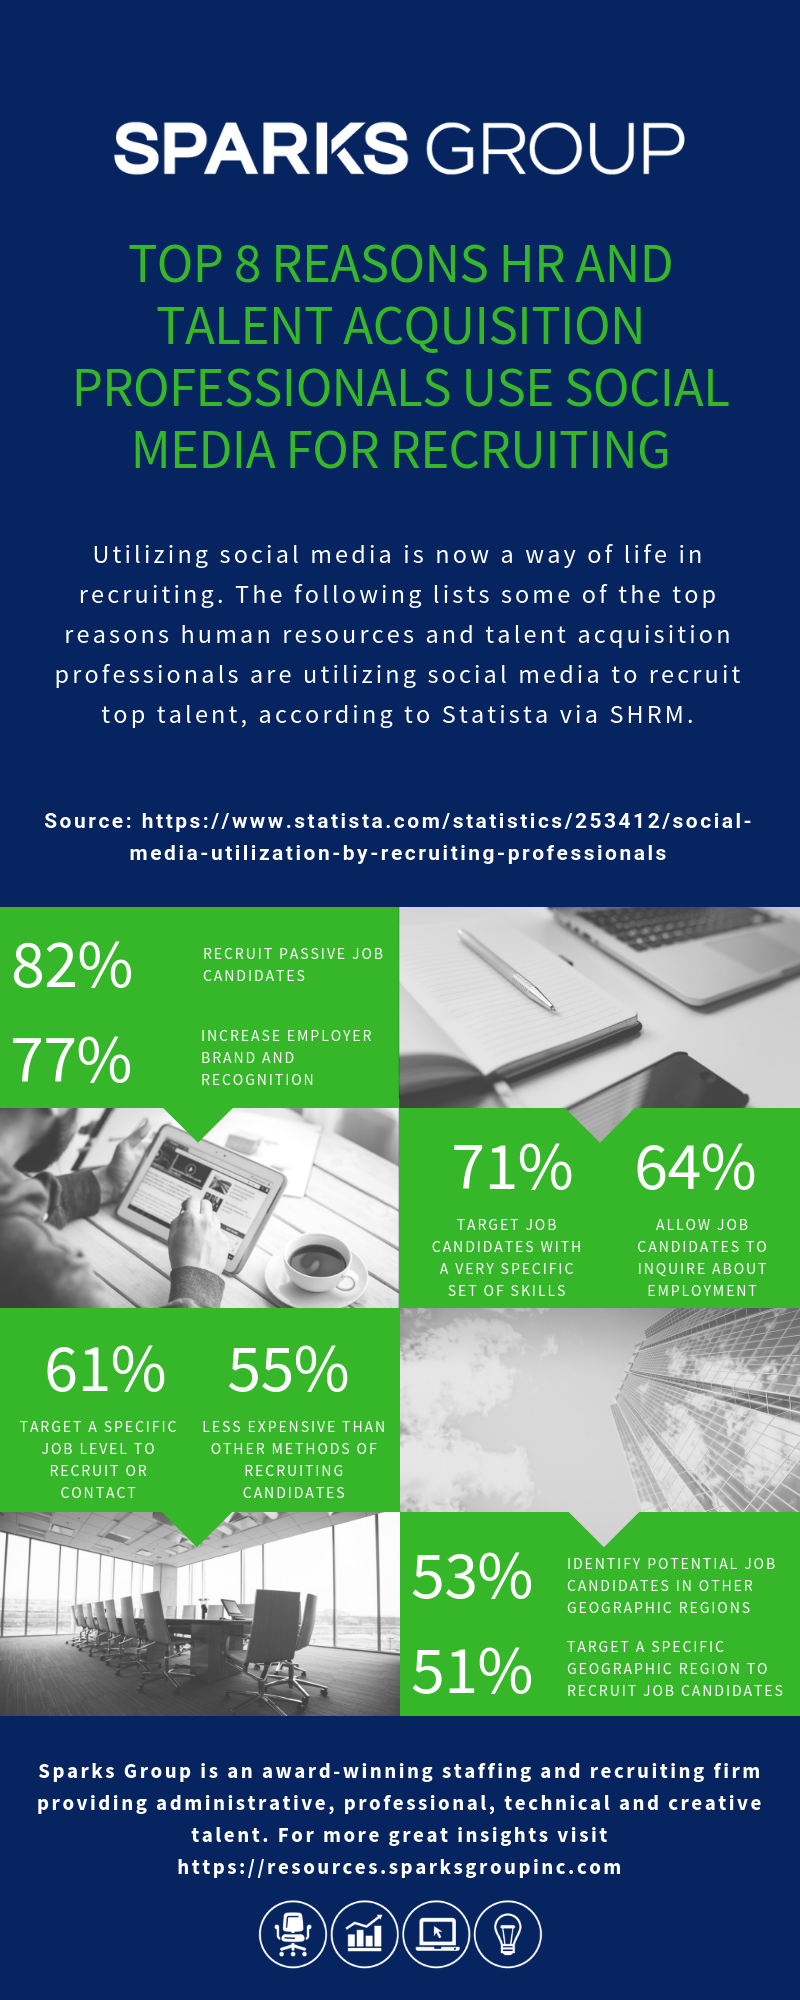 Top 8 Reasons Human Resources and Talent Acquisition Professionals Use Social Media for Recruiting